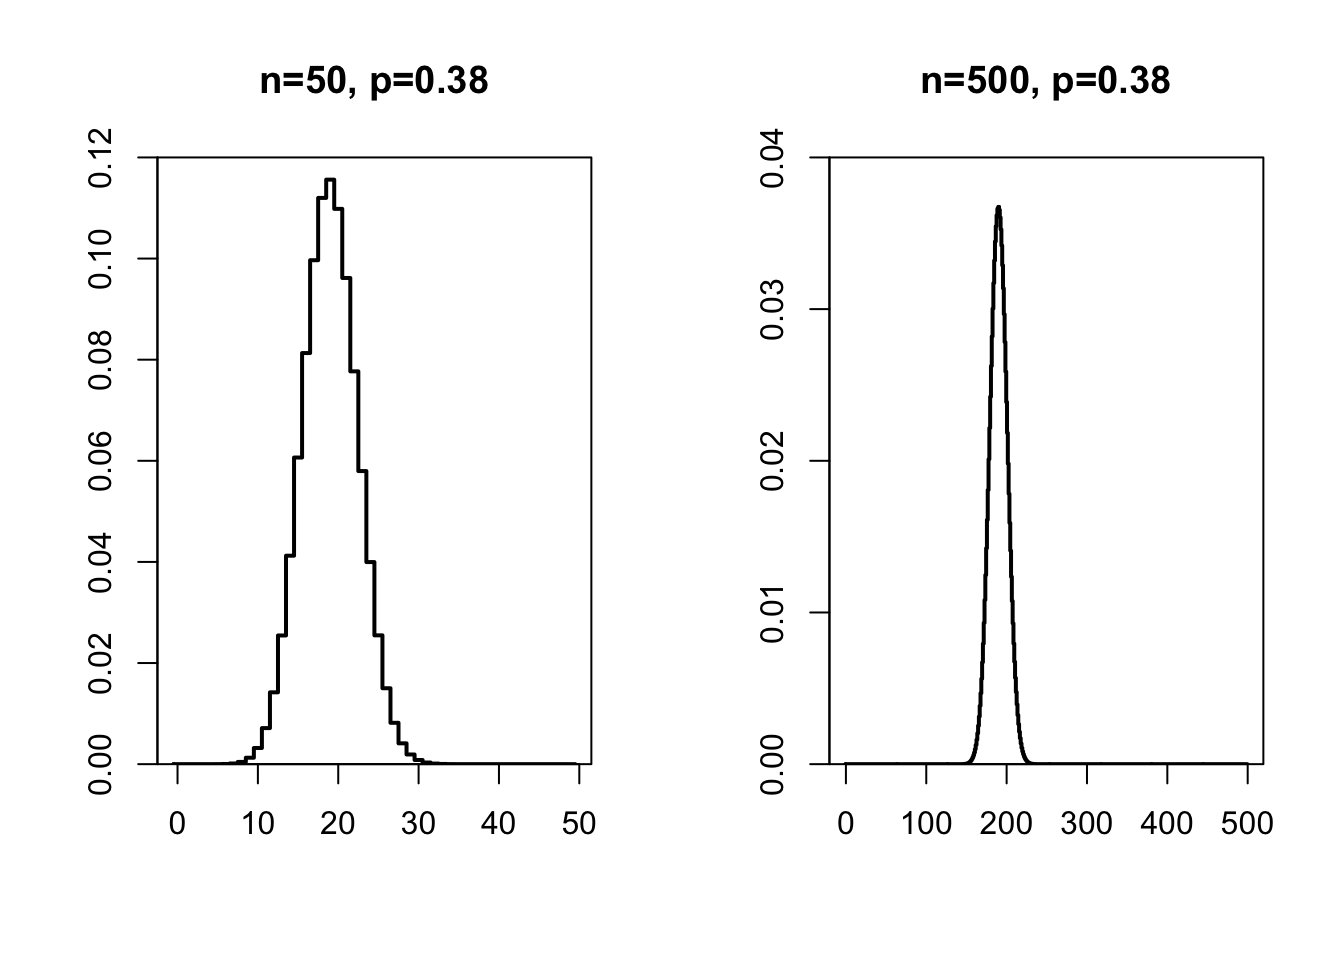 Probability distribution of a binomial variable x with n=50 (left) and n=500 (right) and p=.38.